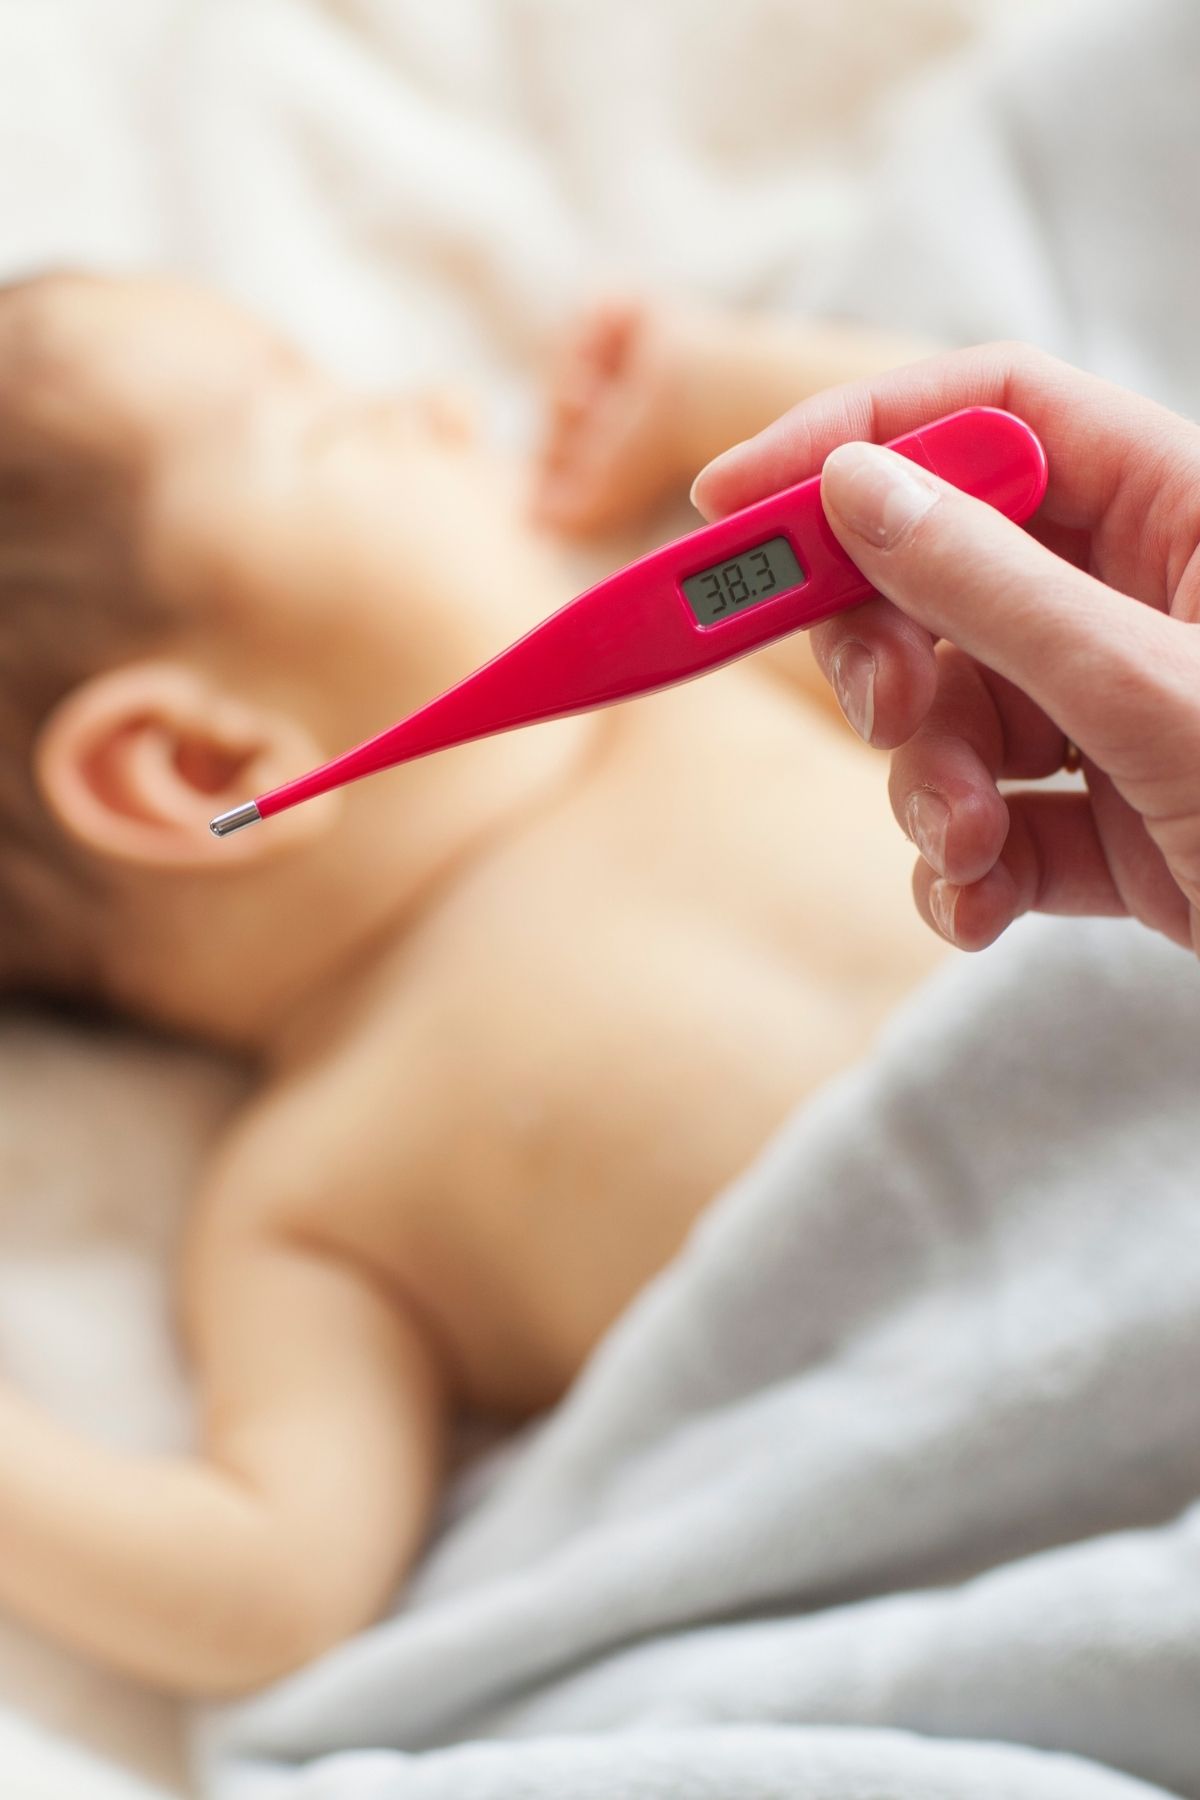 Mother checks her sick newborn baby's temperature with a red thermometer while baby sleeps.